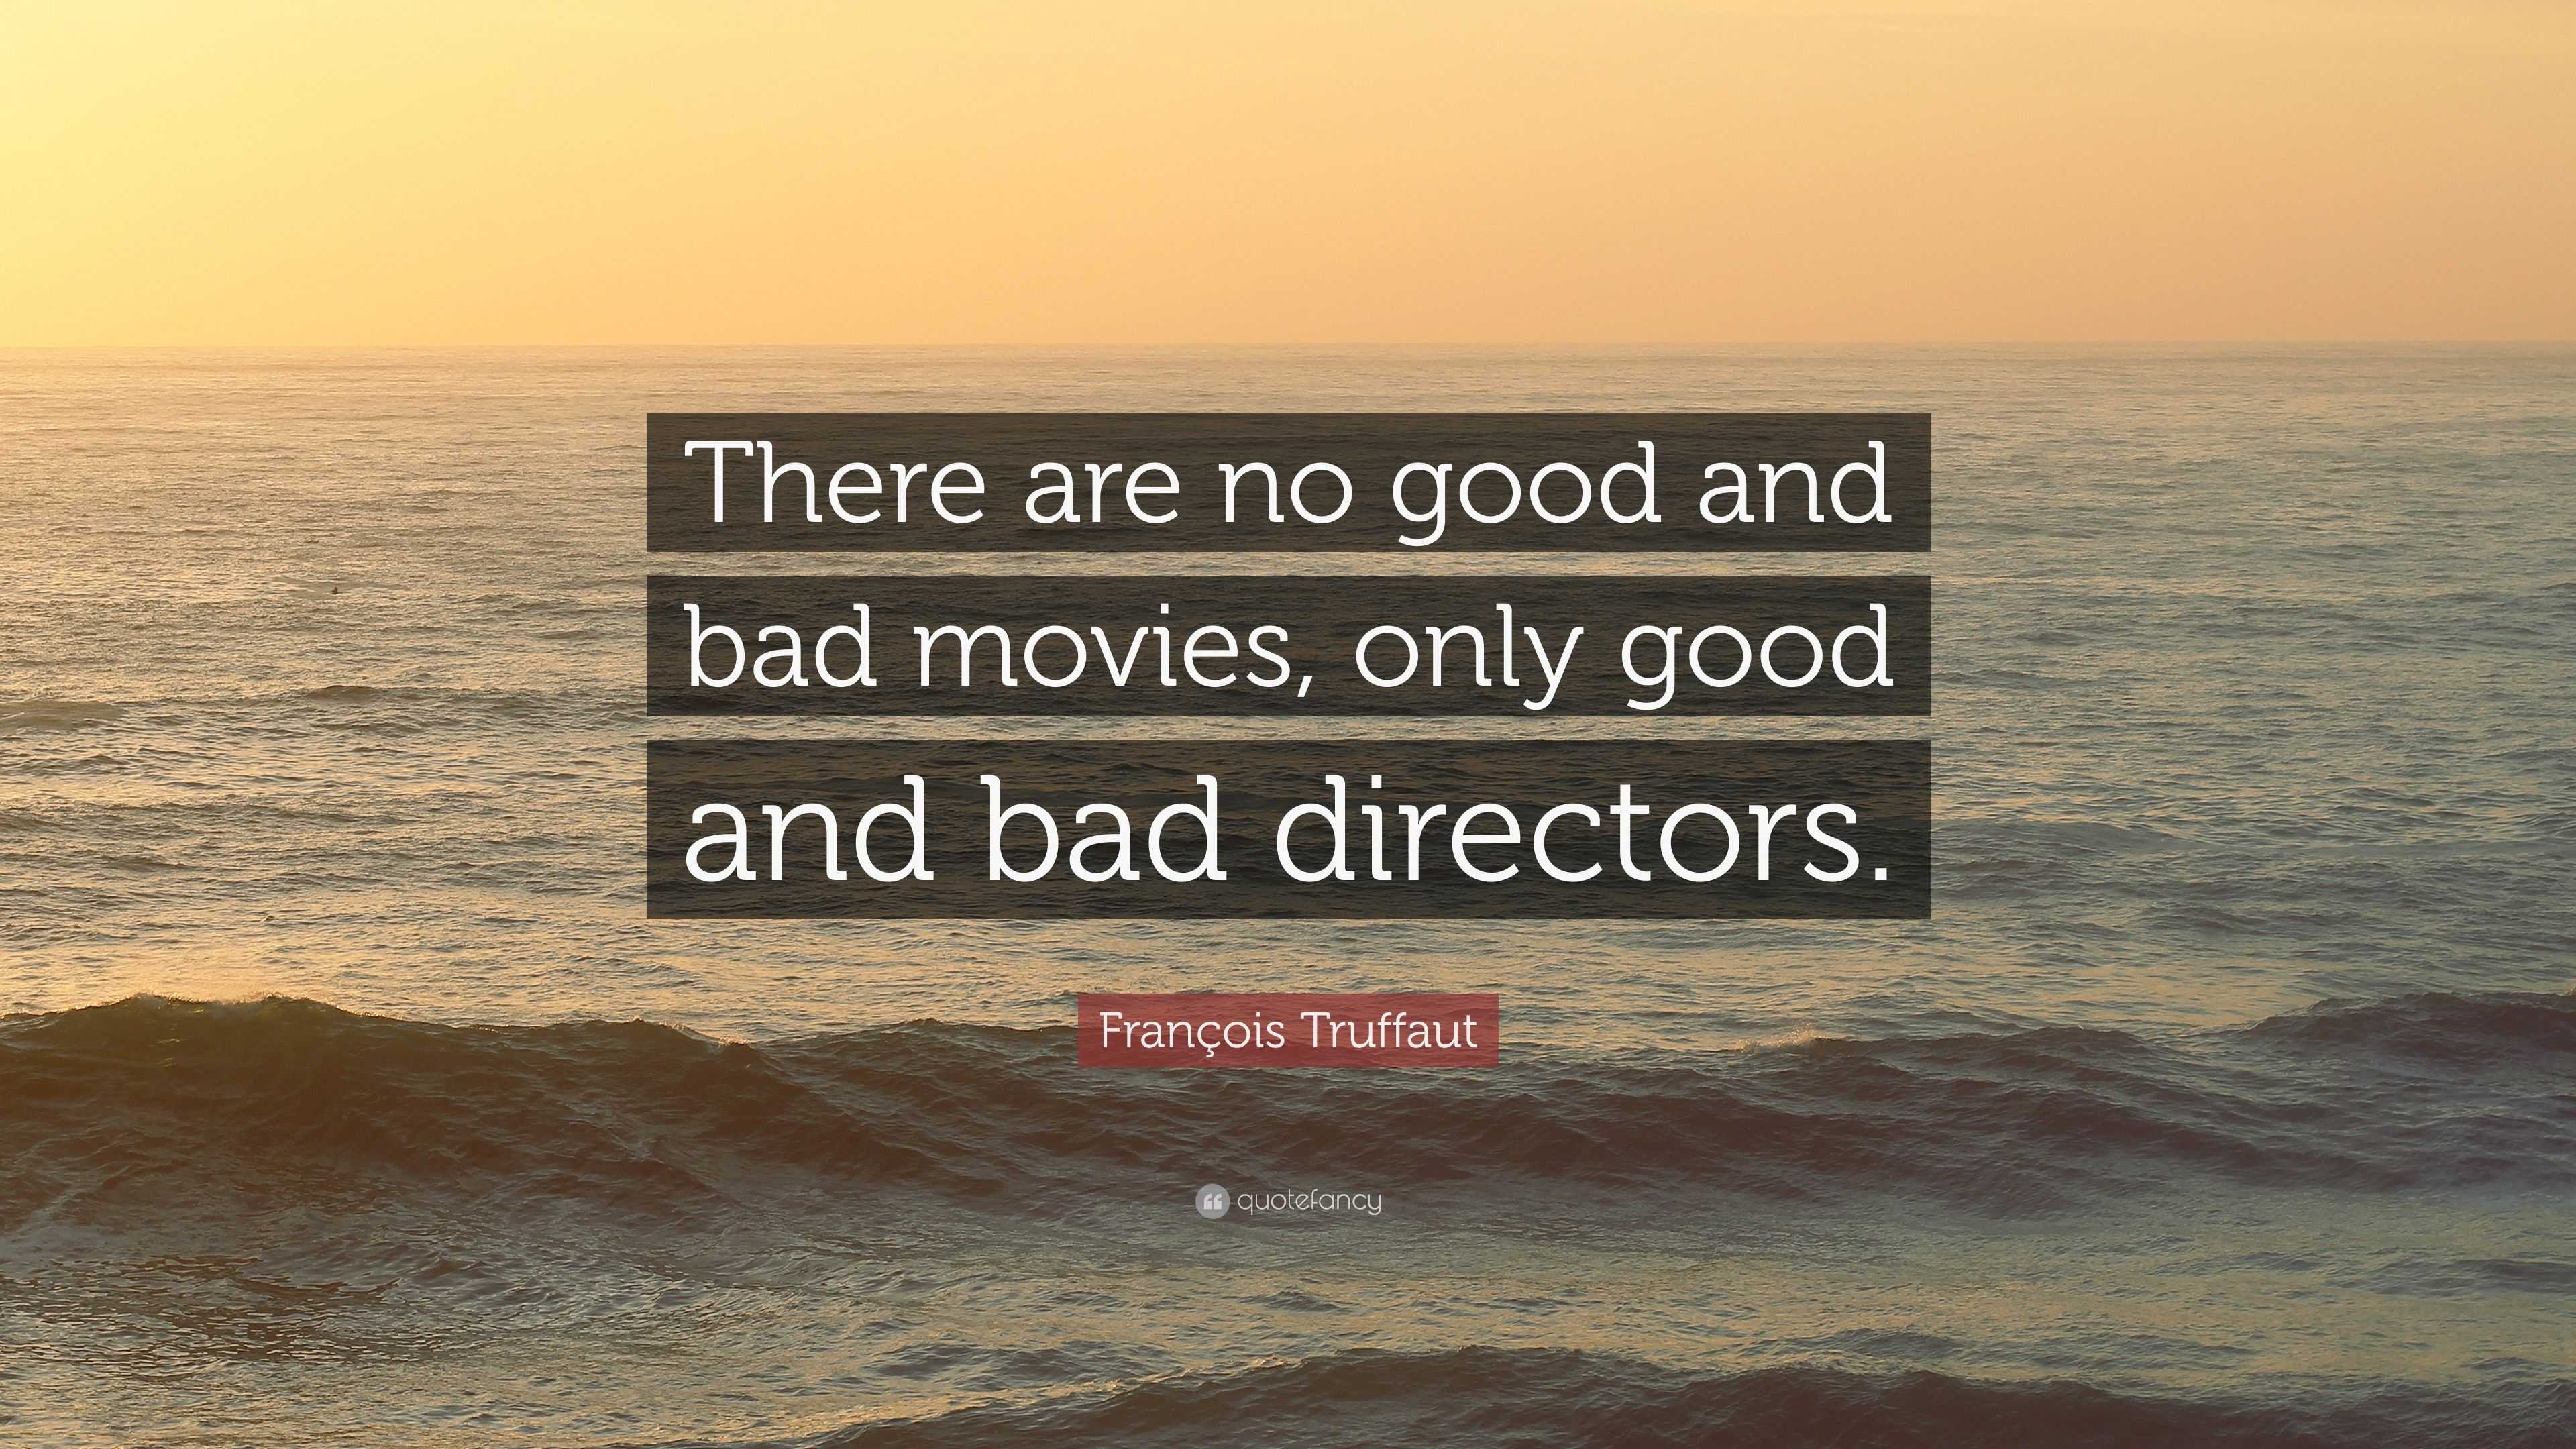 François Truffaut Quote: “There are no good and bad movies, only good